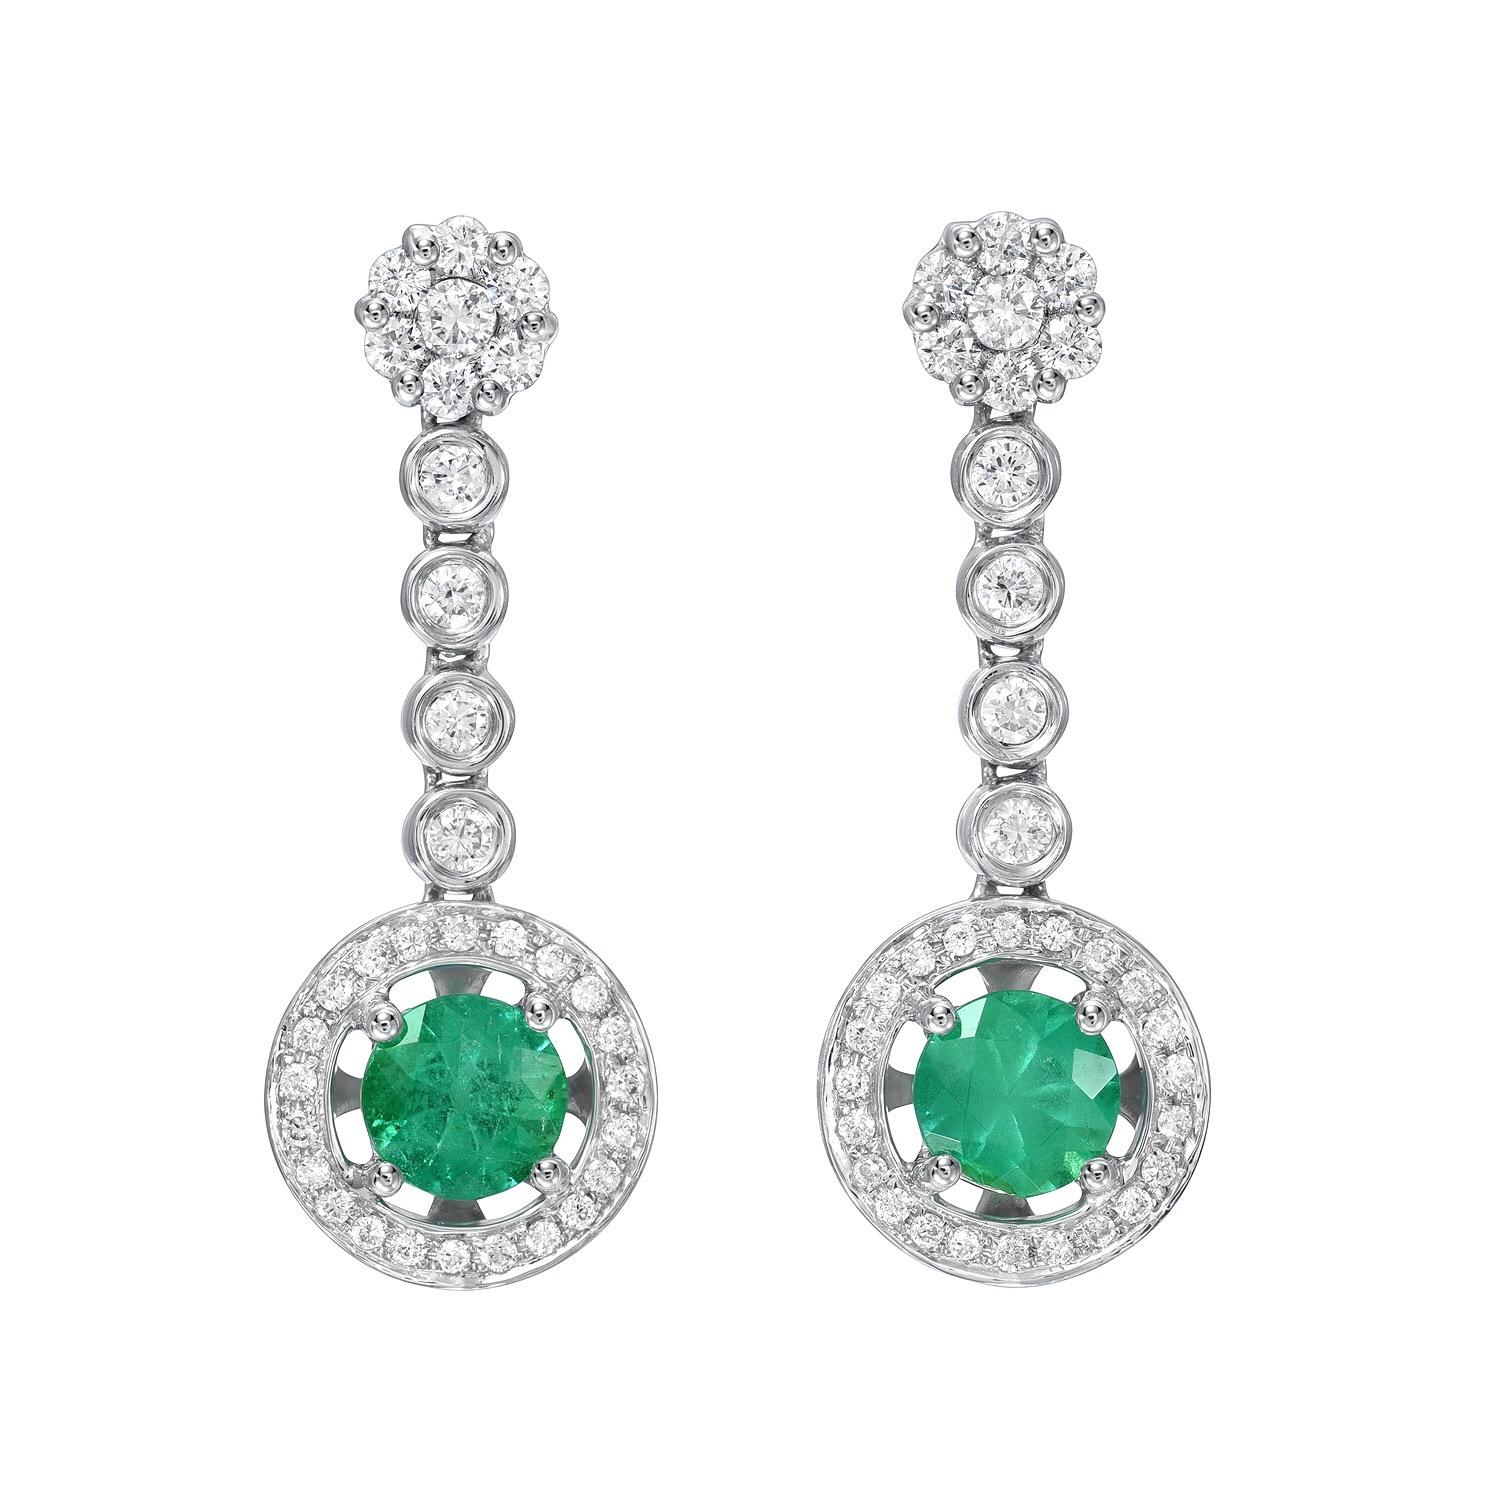 Round Cut Emerald Earrings 0.98 Carats Round